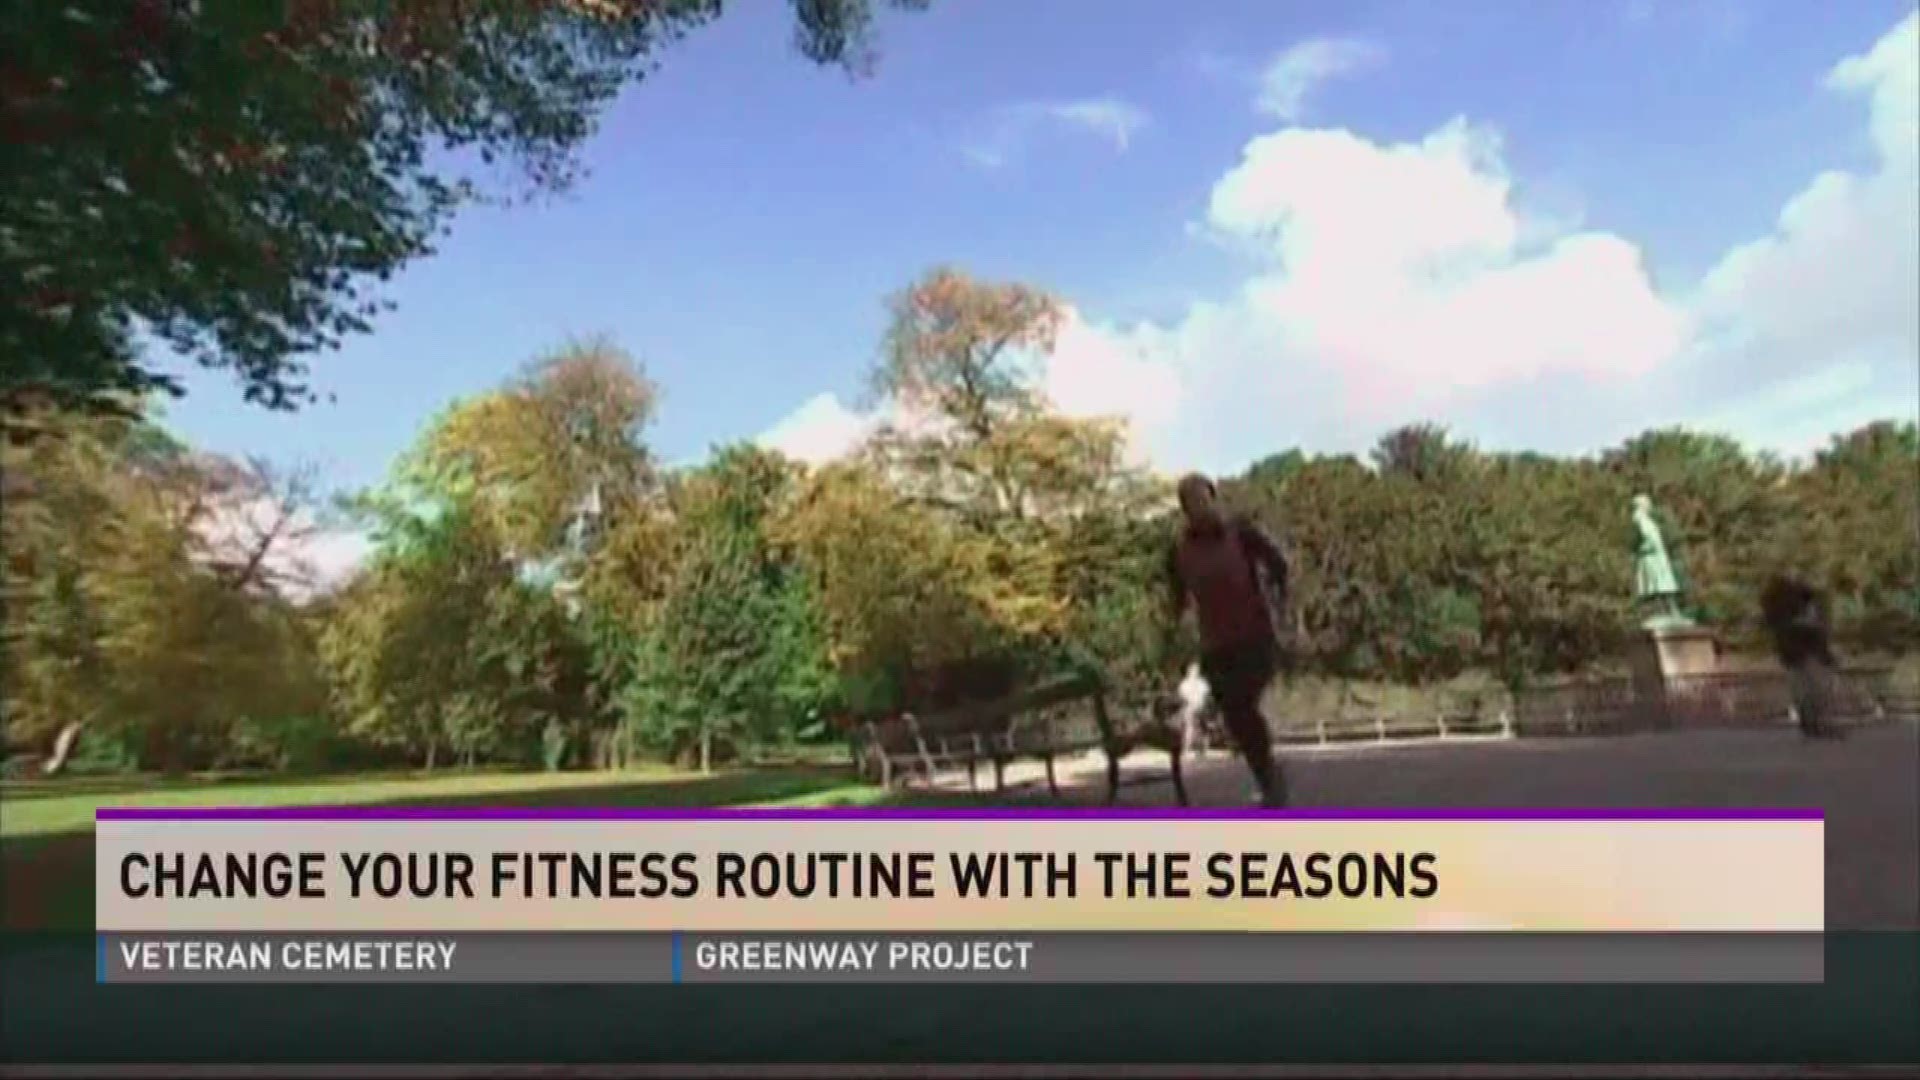 Staying healthy and fit may not seem like the most exciting thing to do this season.